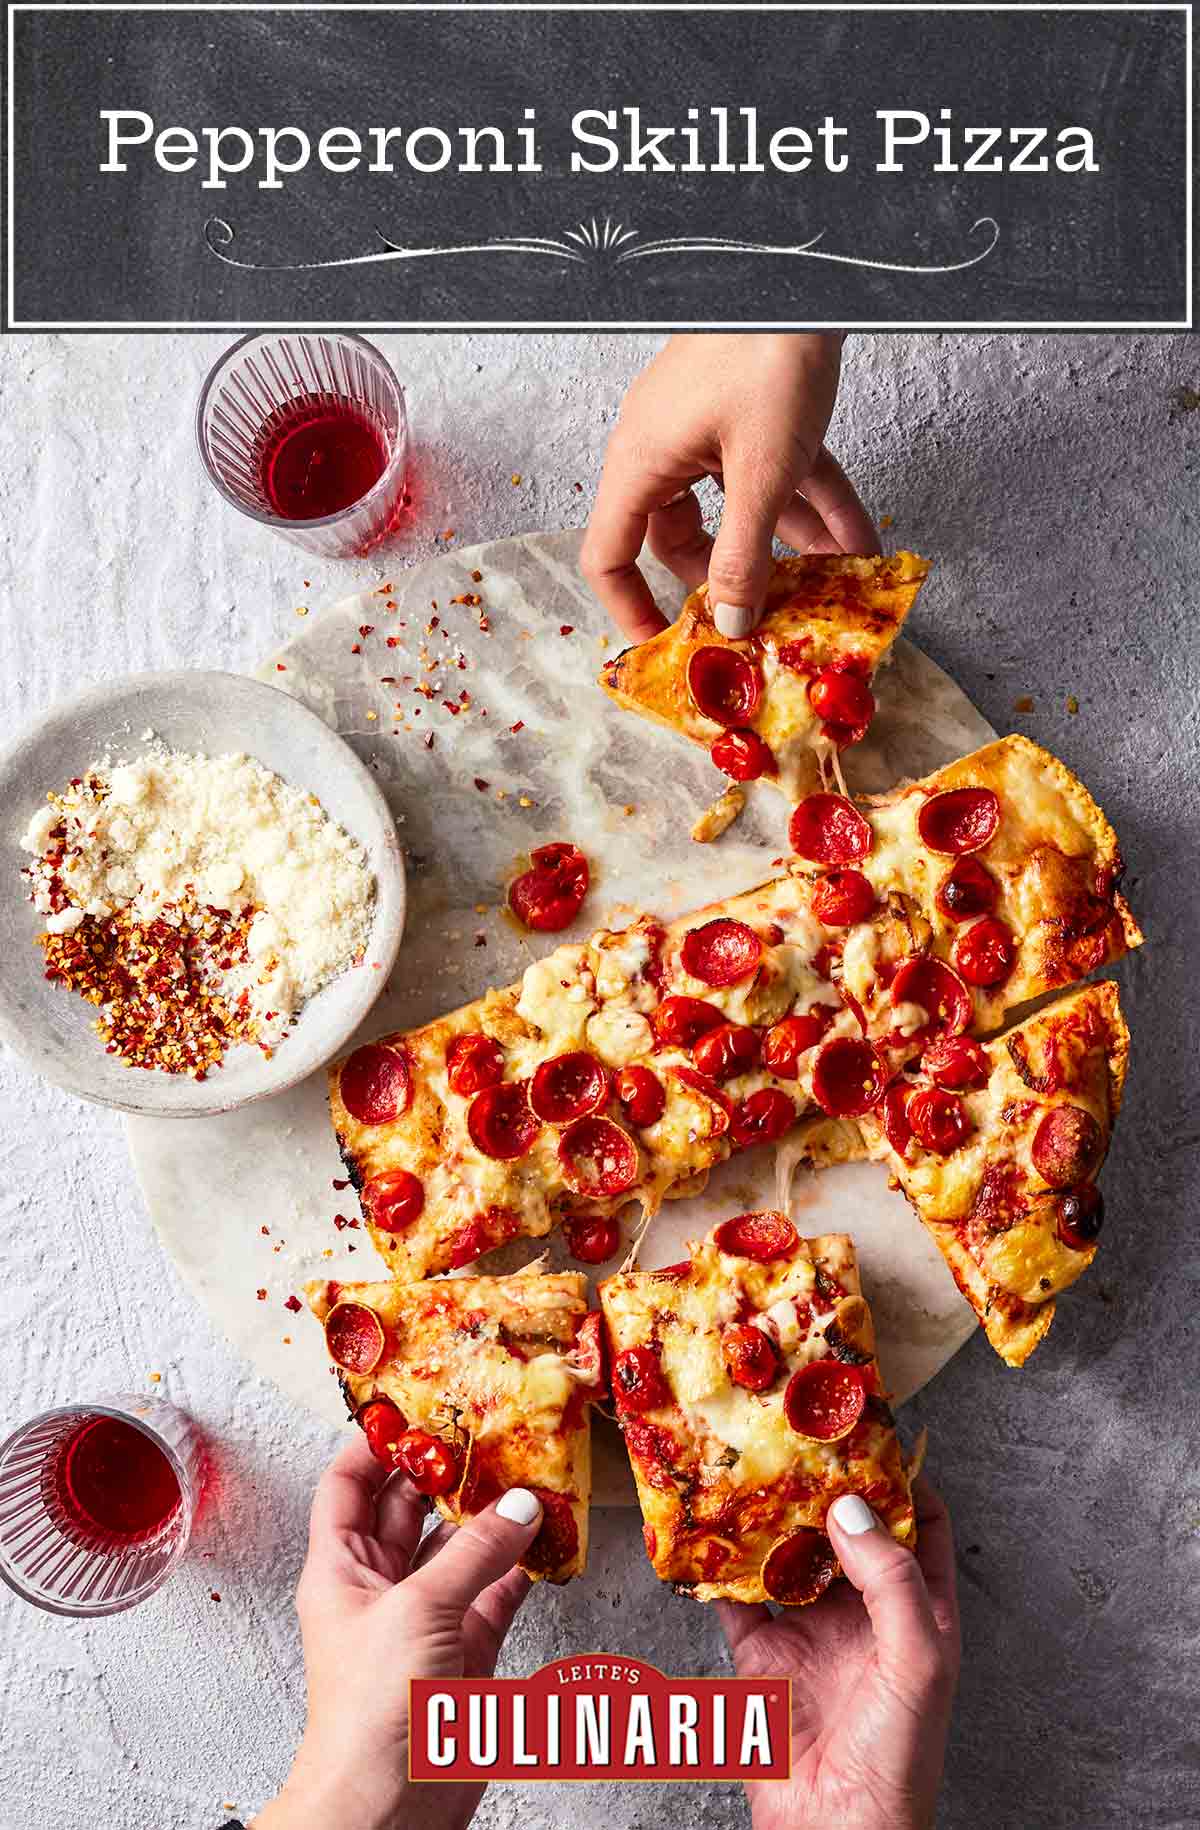 Hands grabbing pieces of skillet pepperoni pizza with two glasses on the side and a bowl of parmesan and pepper flakes